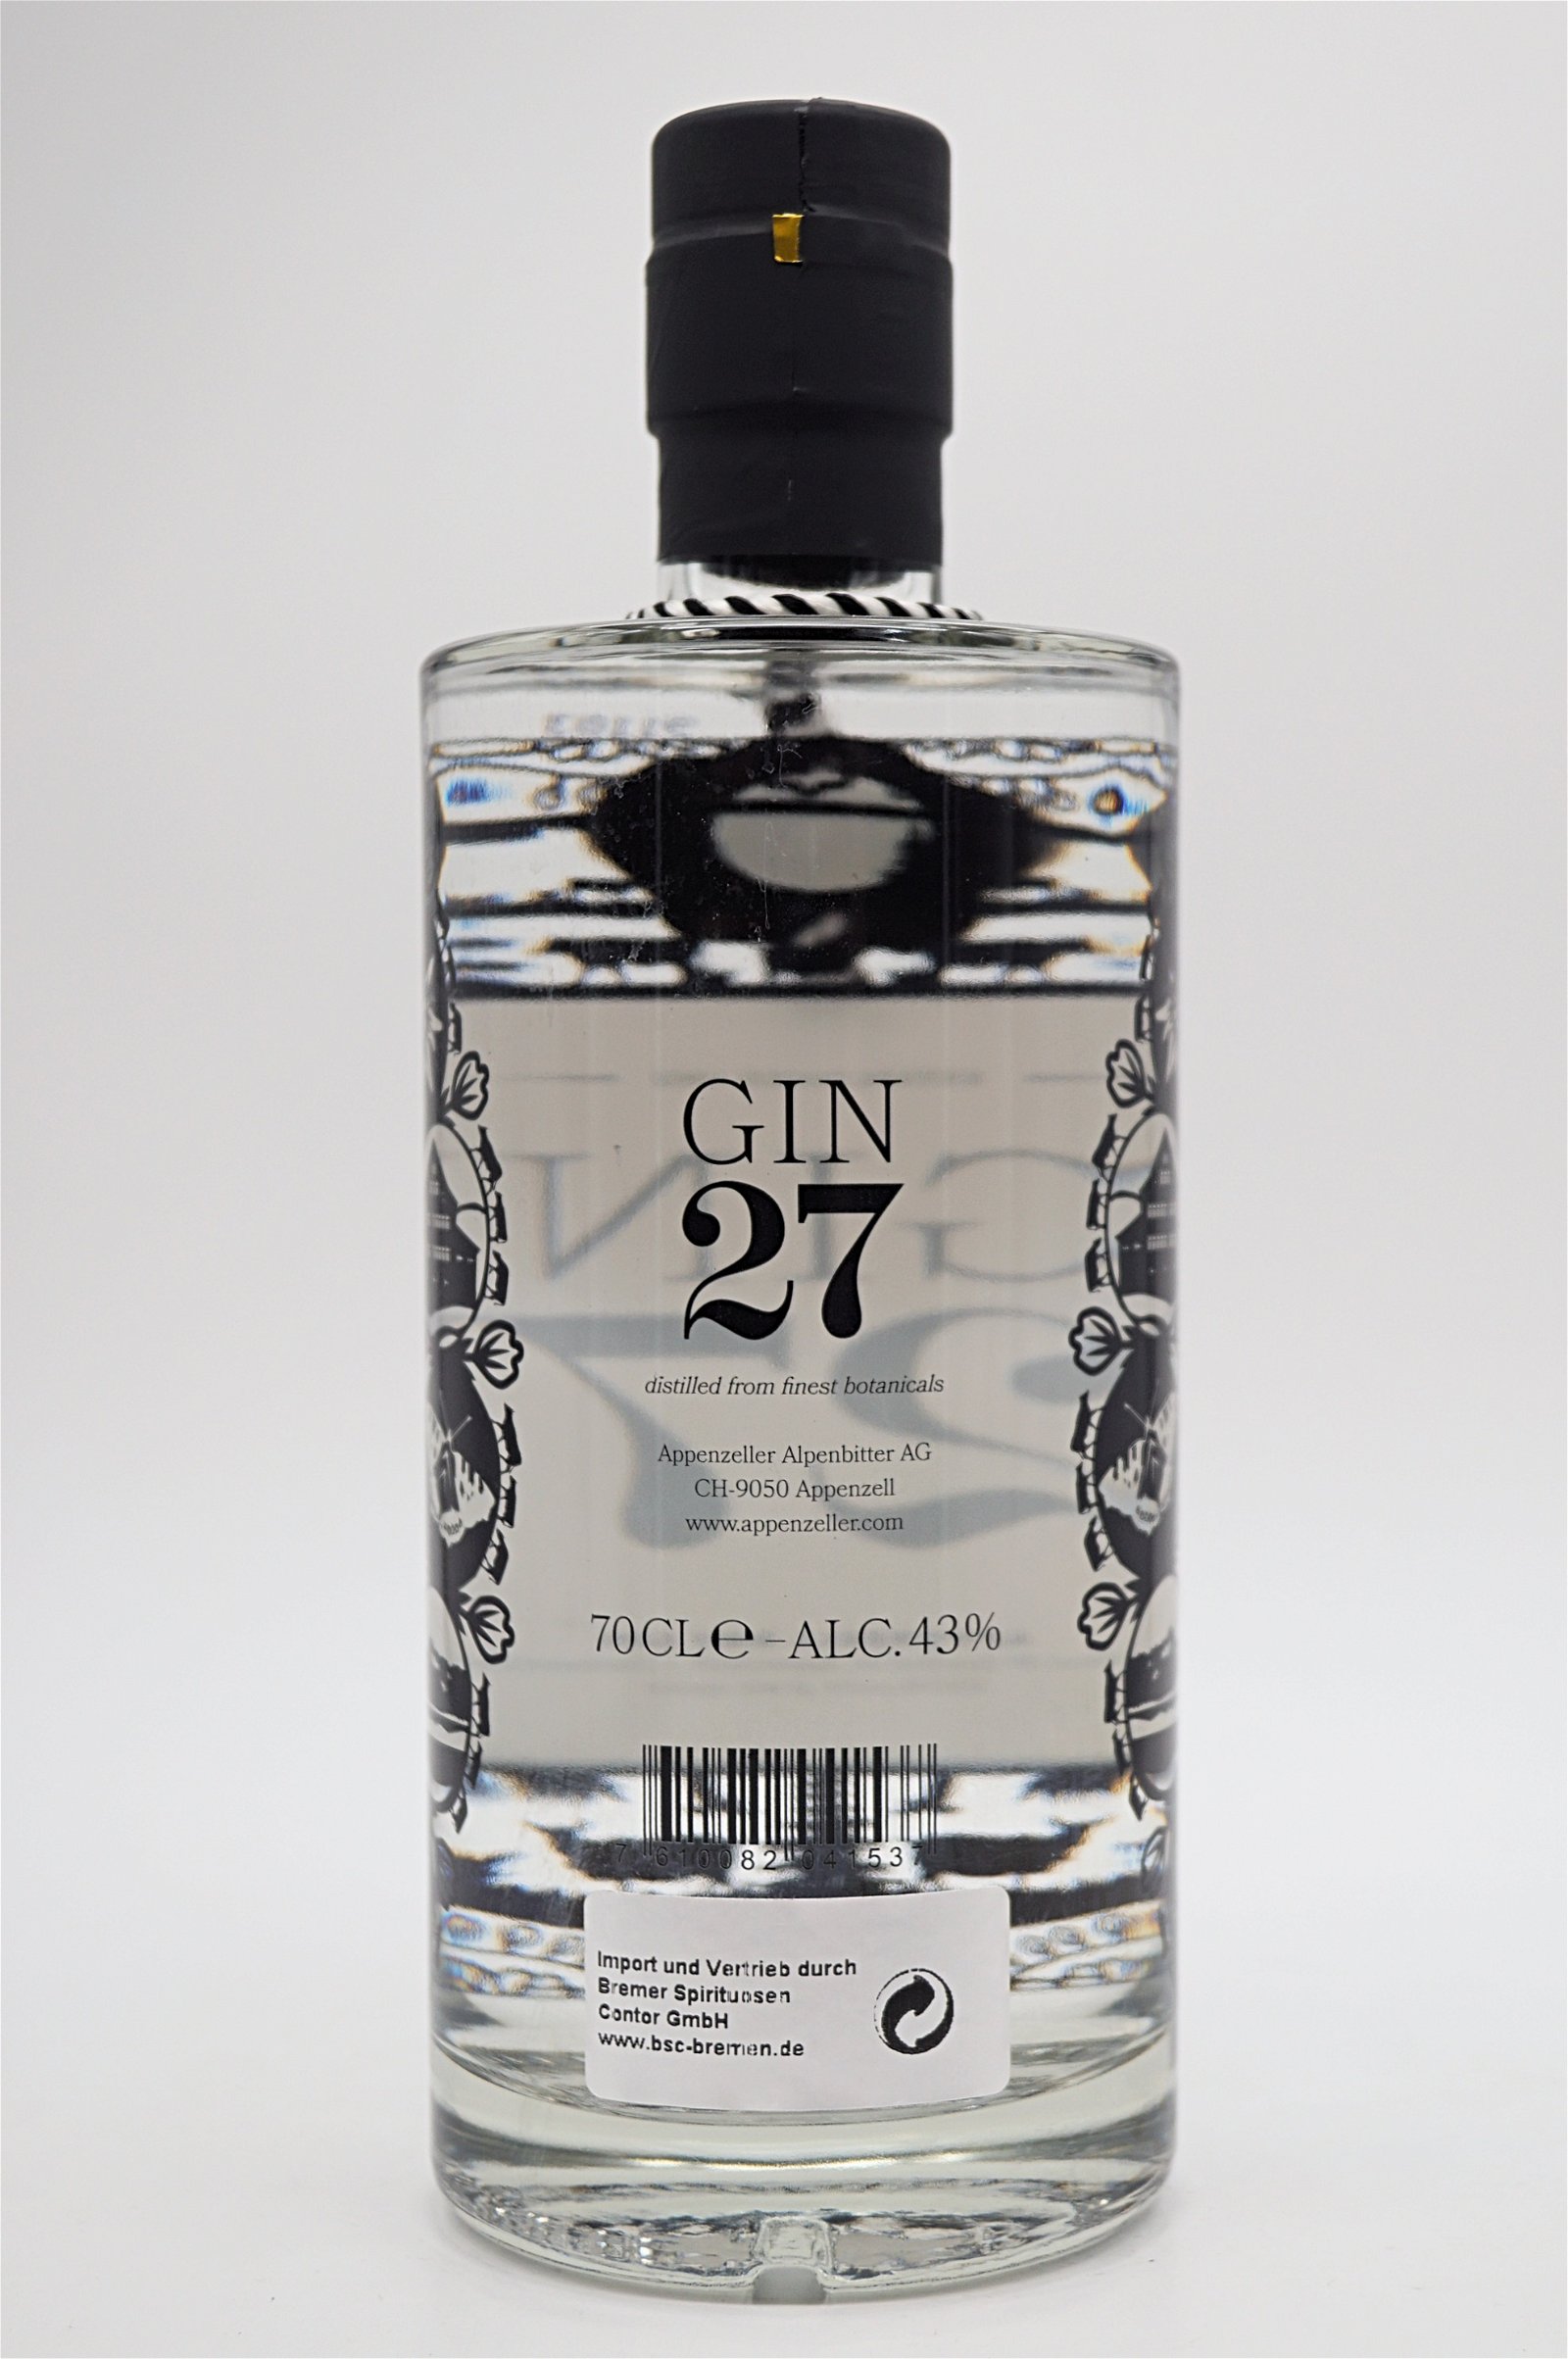 Gin 27 Appenzell Dry Gin